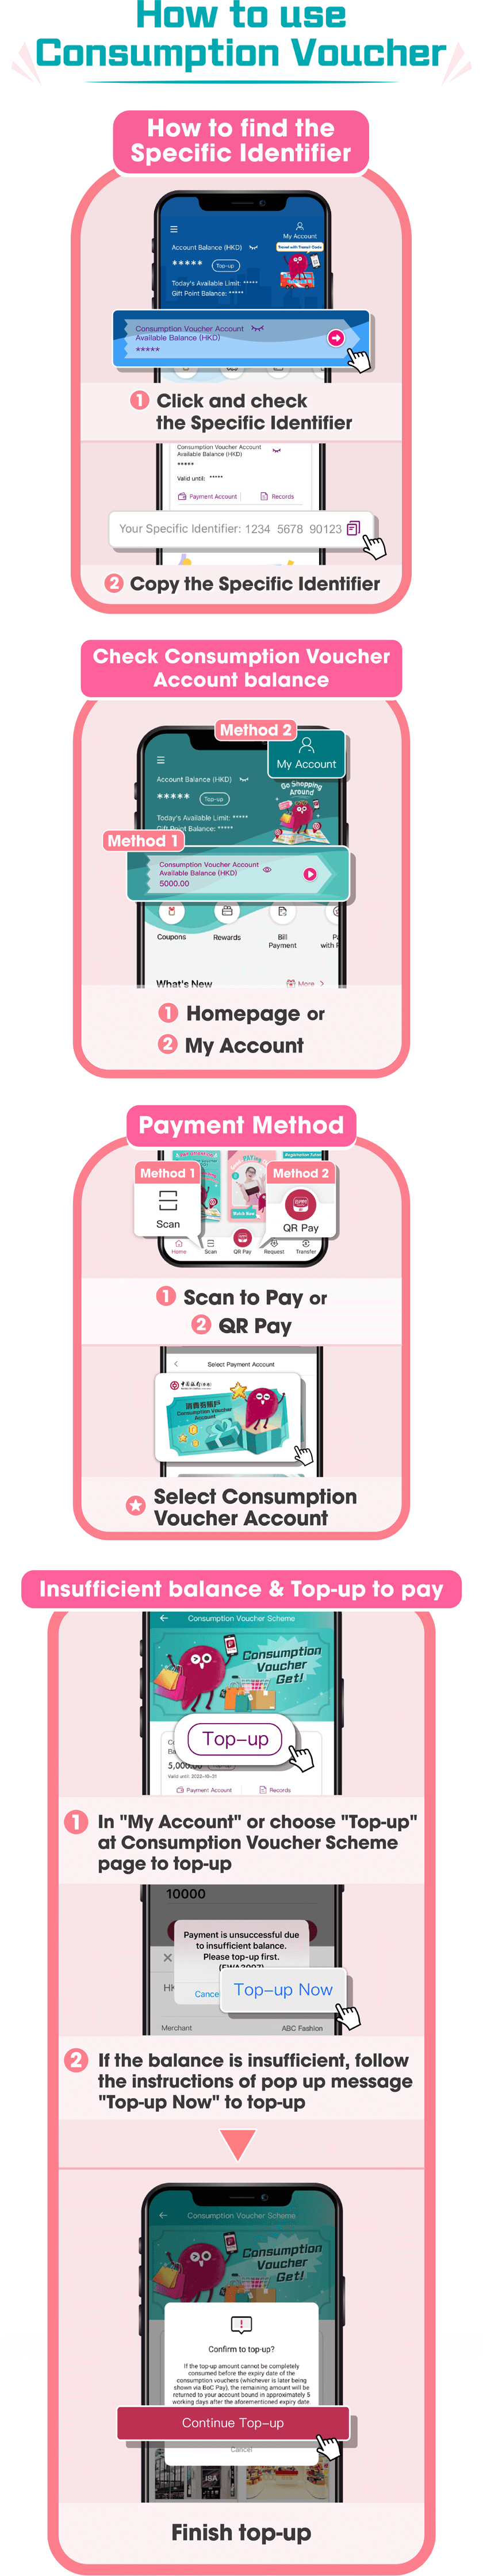 How to use consumption voucher